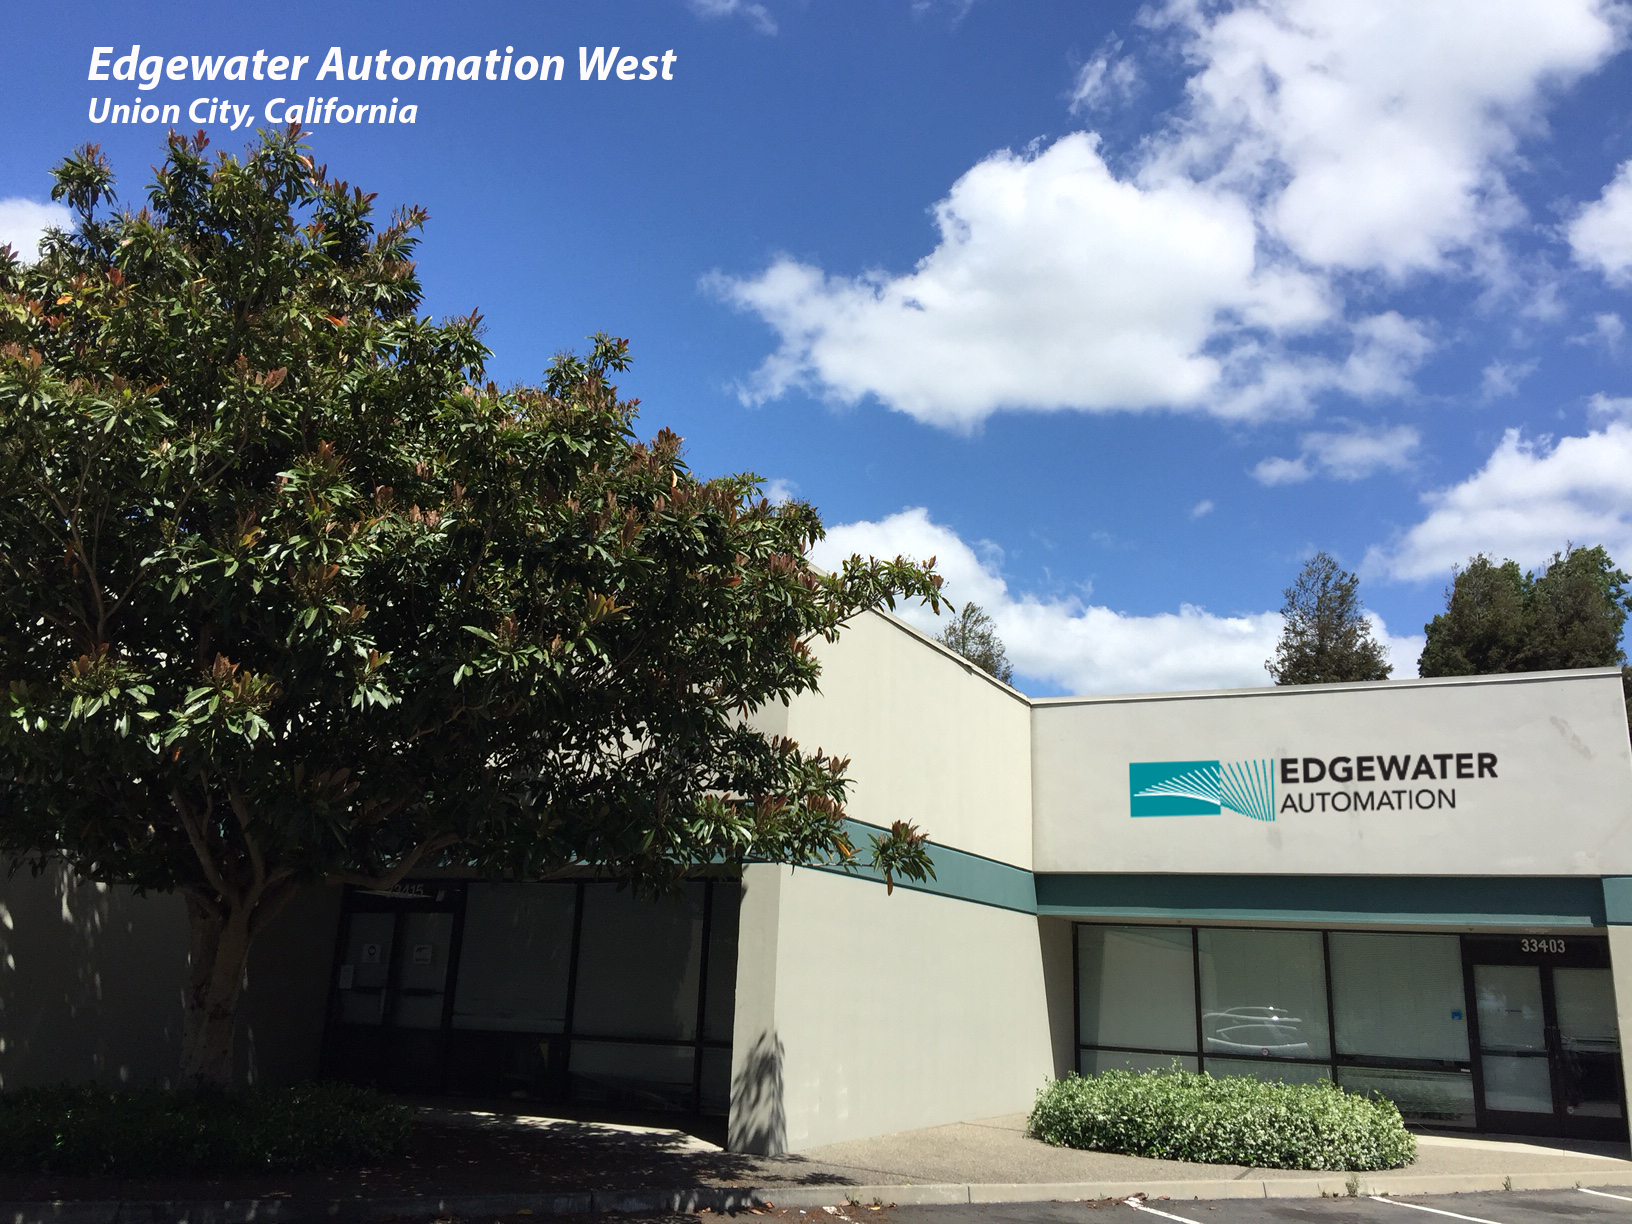 Edgewater Automation_West Sales Office_Union City California